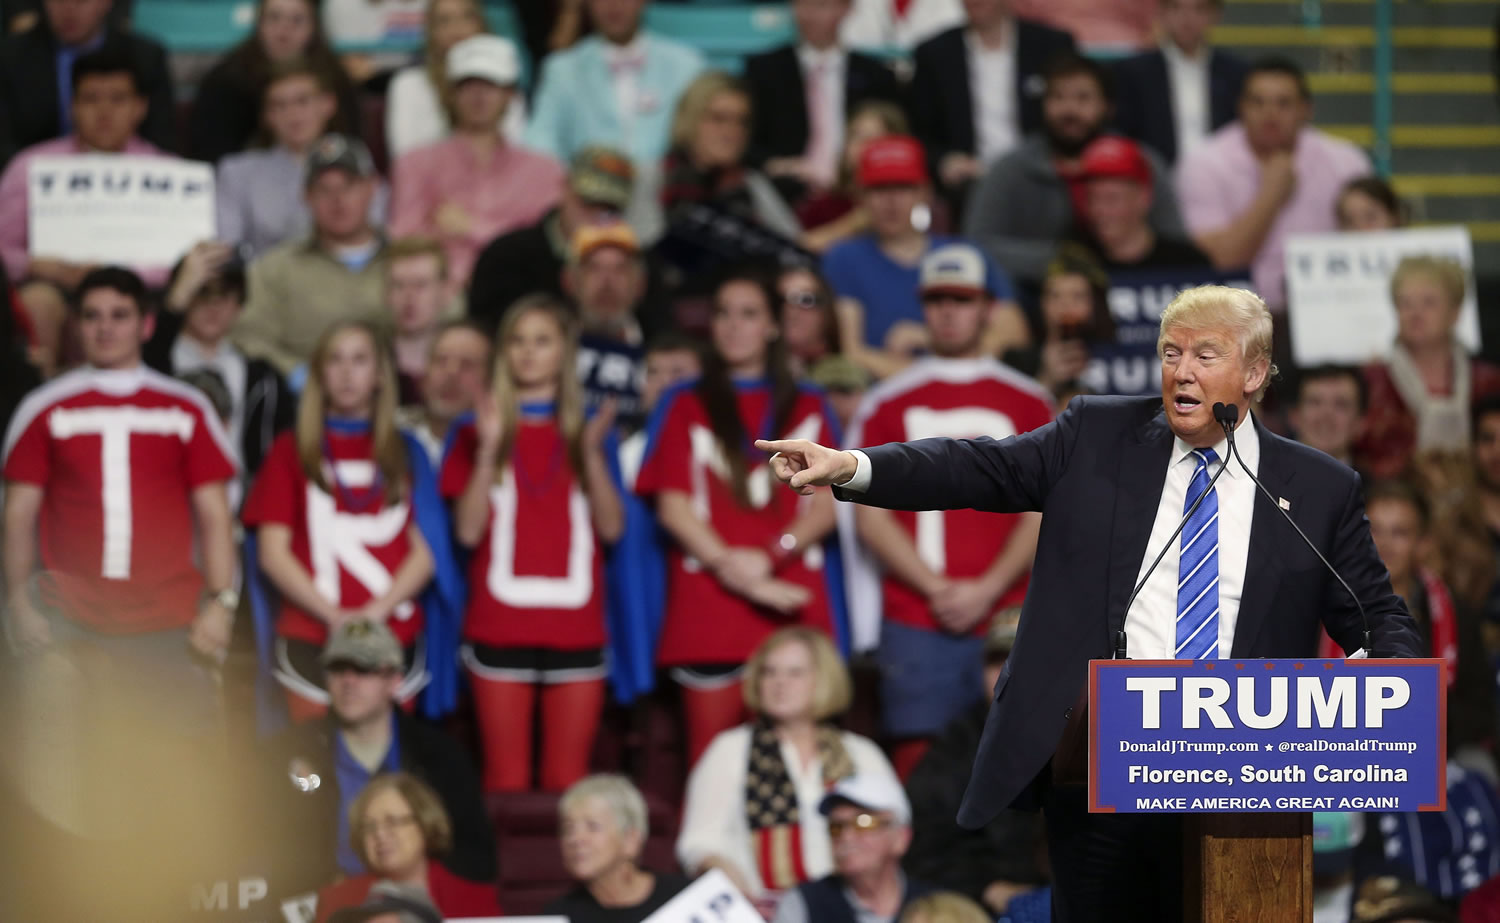 Republican presidential candidate Donald Trump gestures as he speaks at a rally Friday, Feb. 5, 2016, in Florence, S.C.